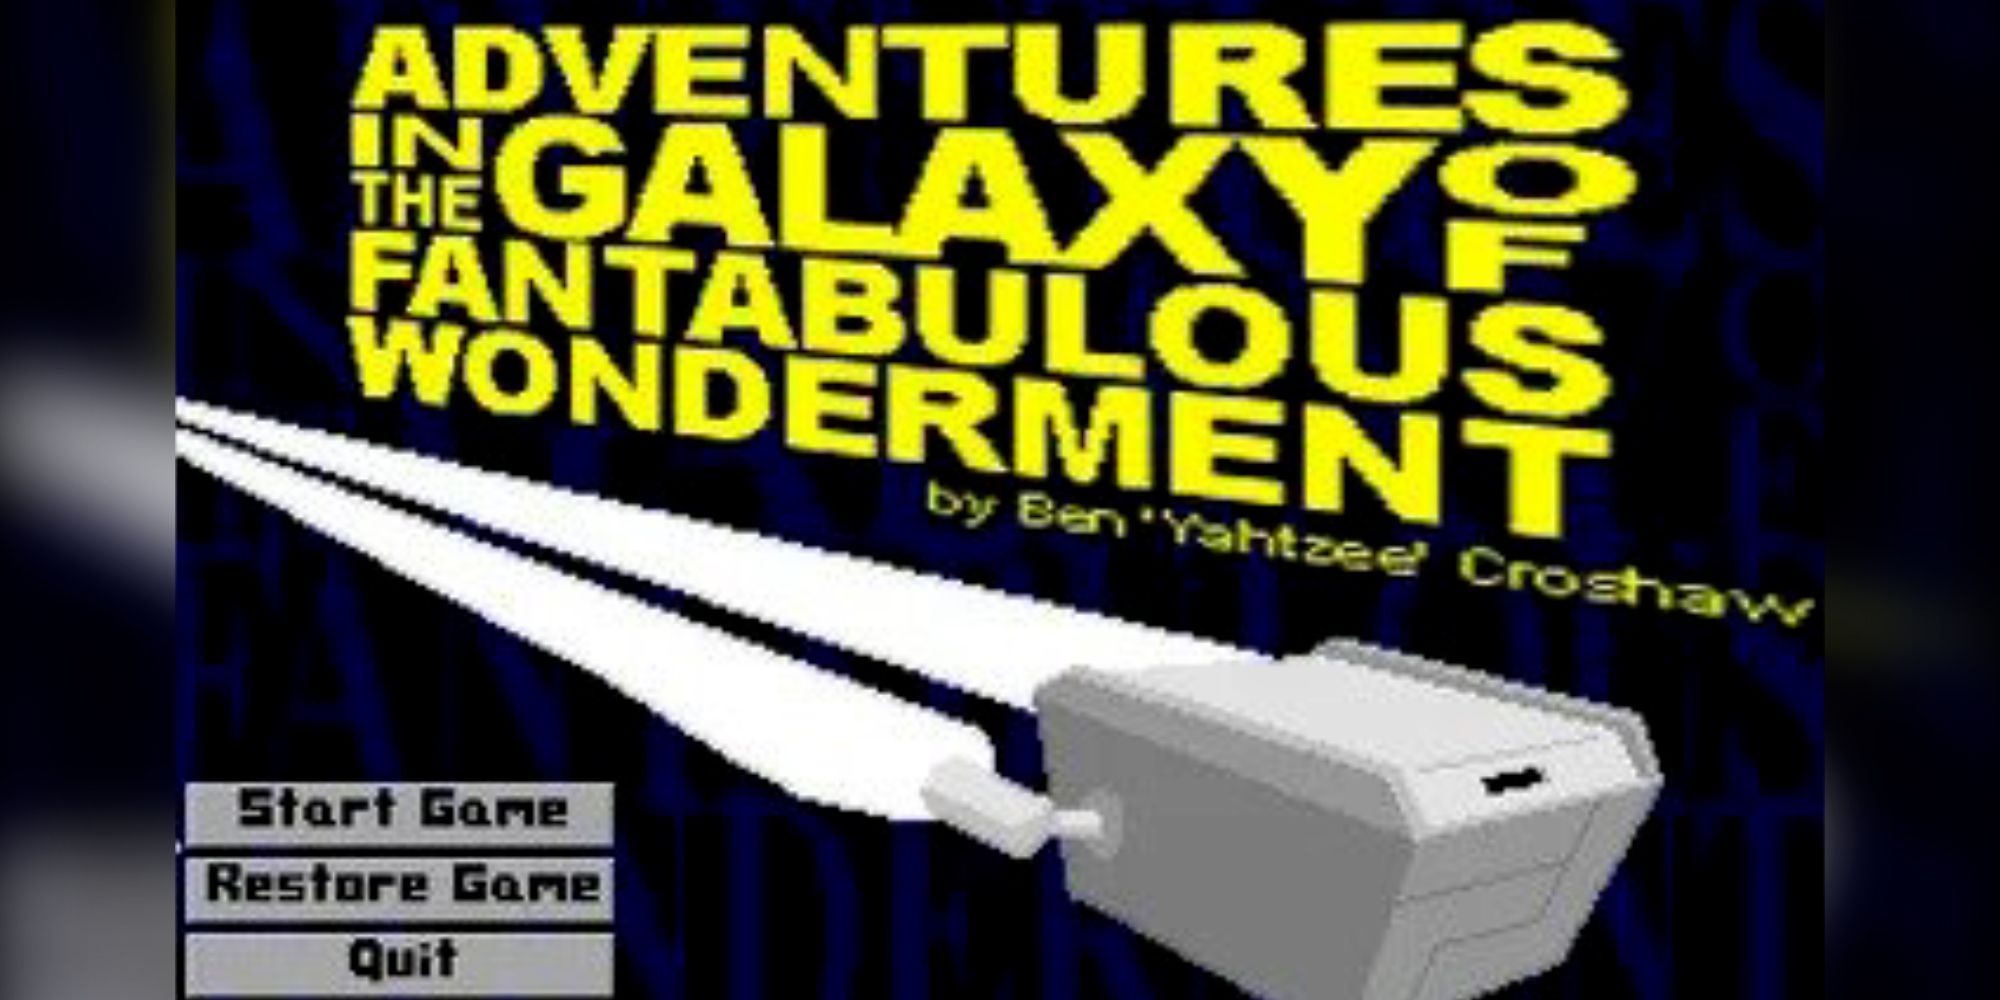 Image Showing The Title Screen Of The Unrealsed Game Adventures In The Galaxy Of Fantabulous Wonderment